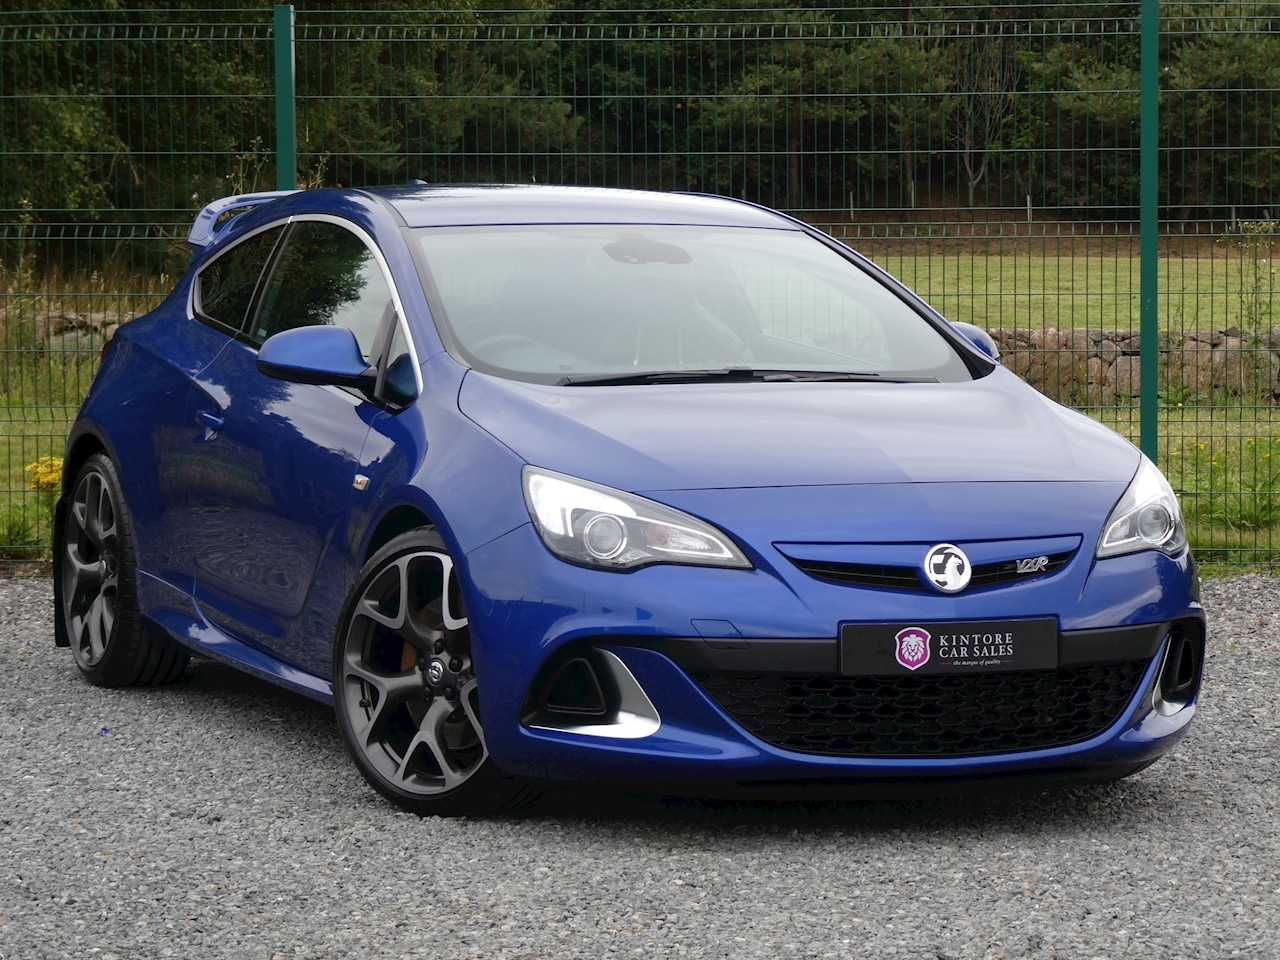 Astra GTC 2.0T VXR Coupe, Manual 2.0 3dr Coupe Manual Petrol